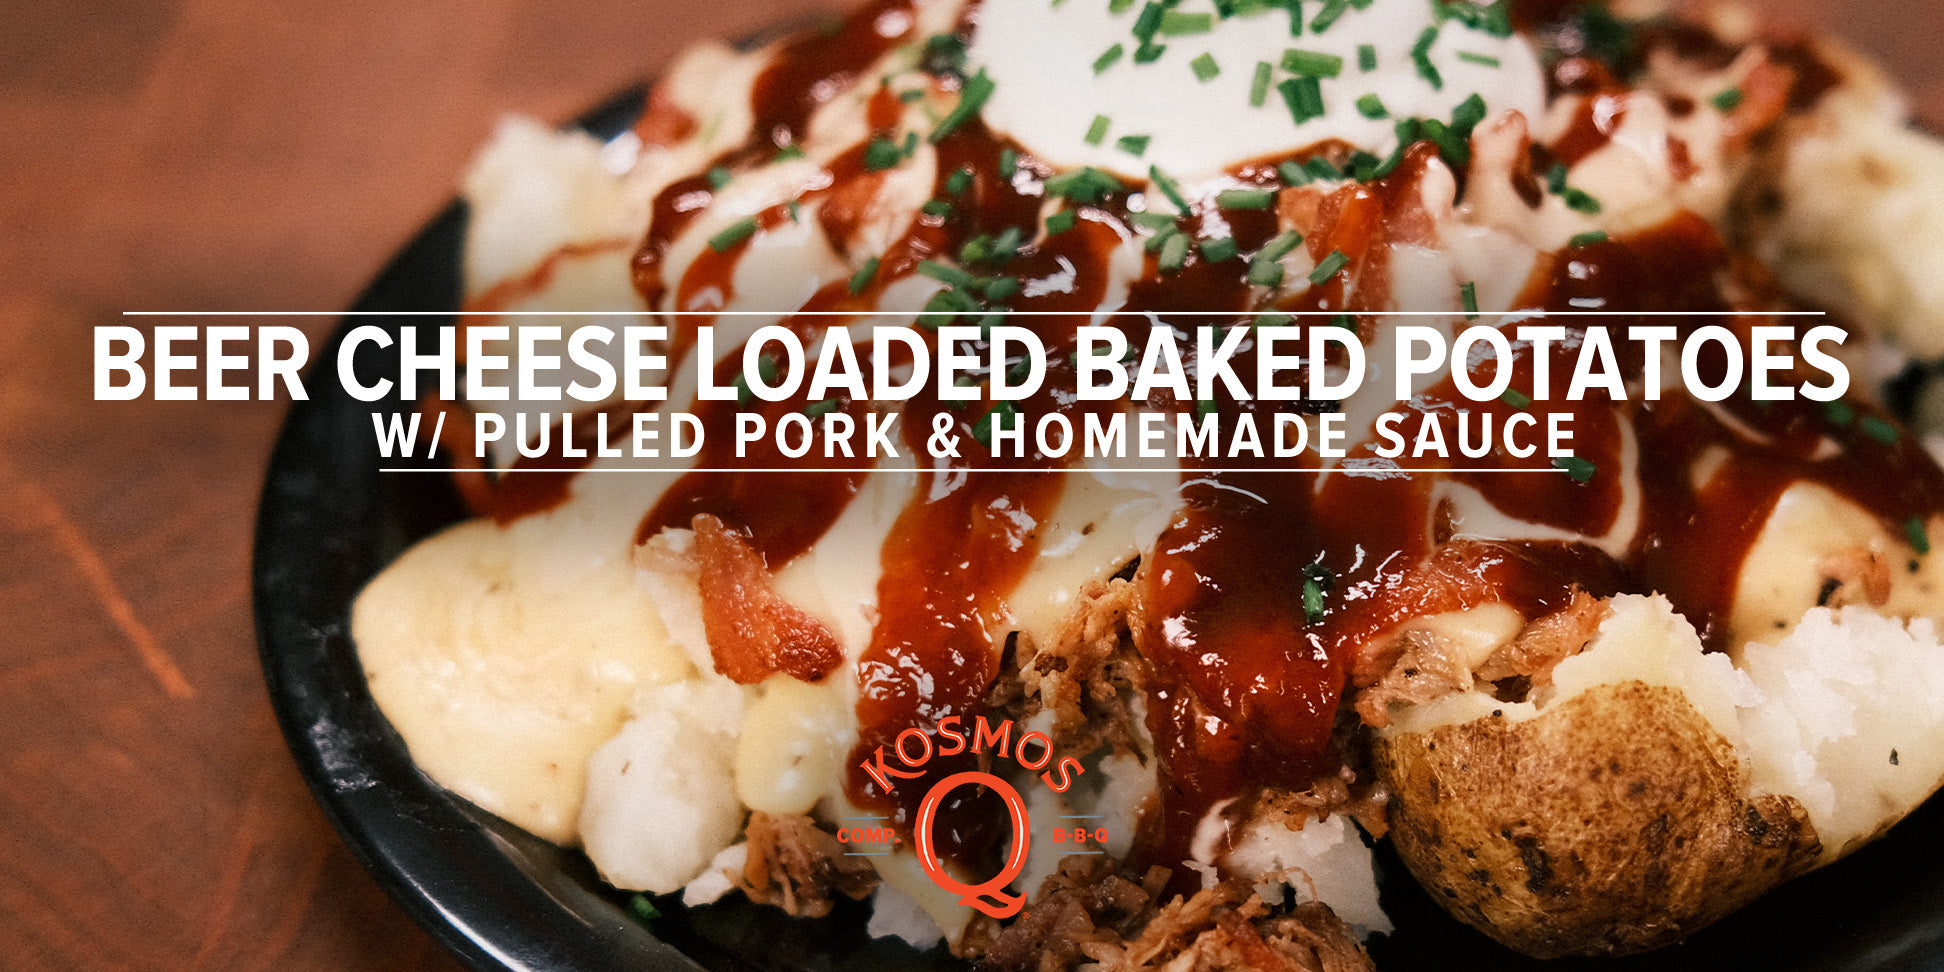 Beer Cheese Loaded Baked Potatoes with Pulled Pork & Homemade Sauce